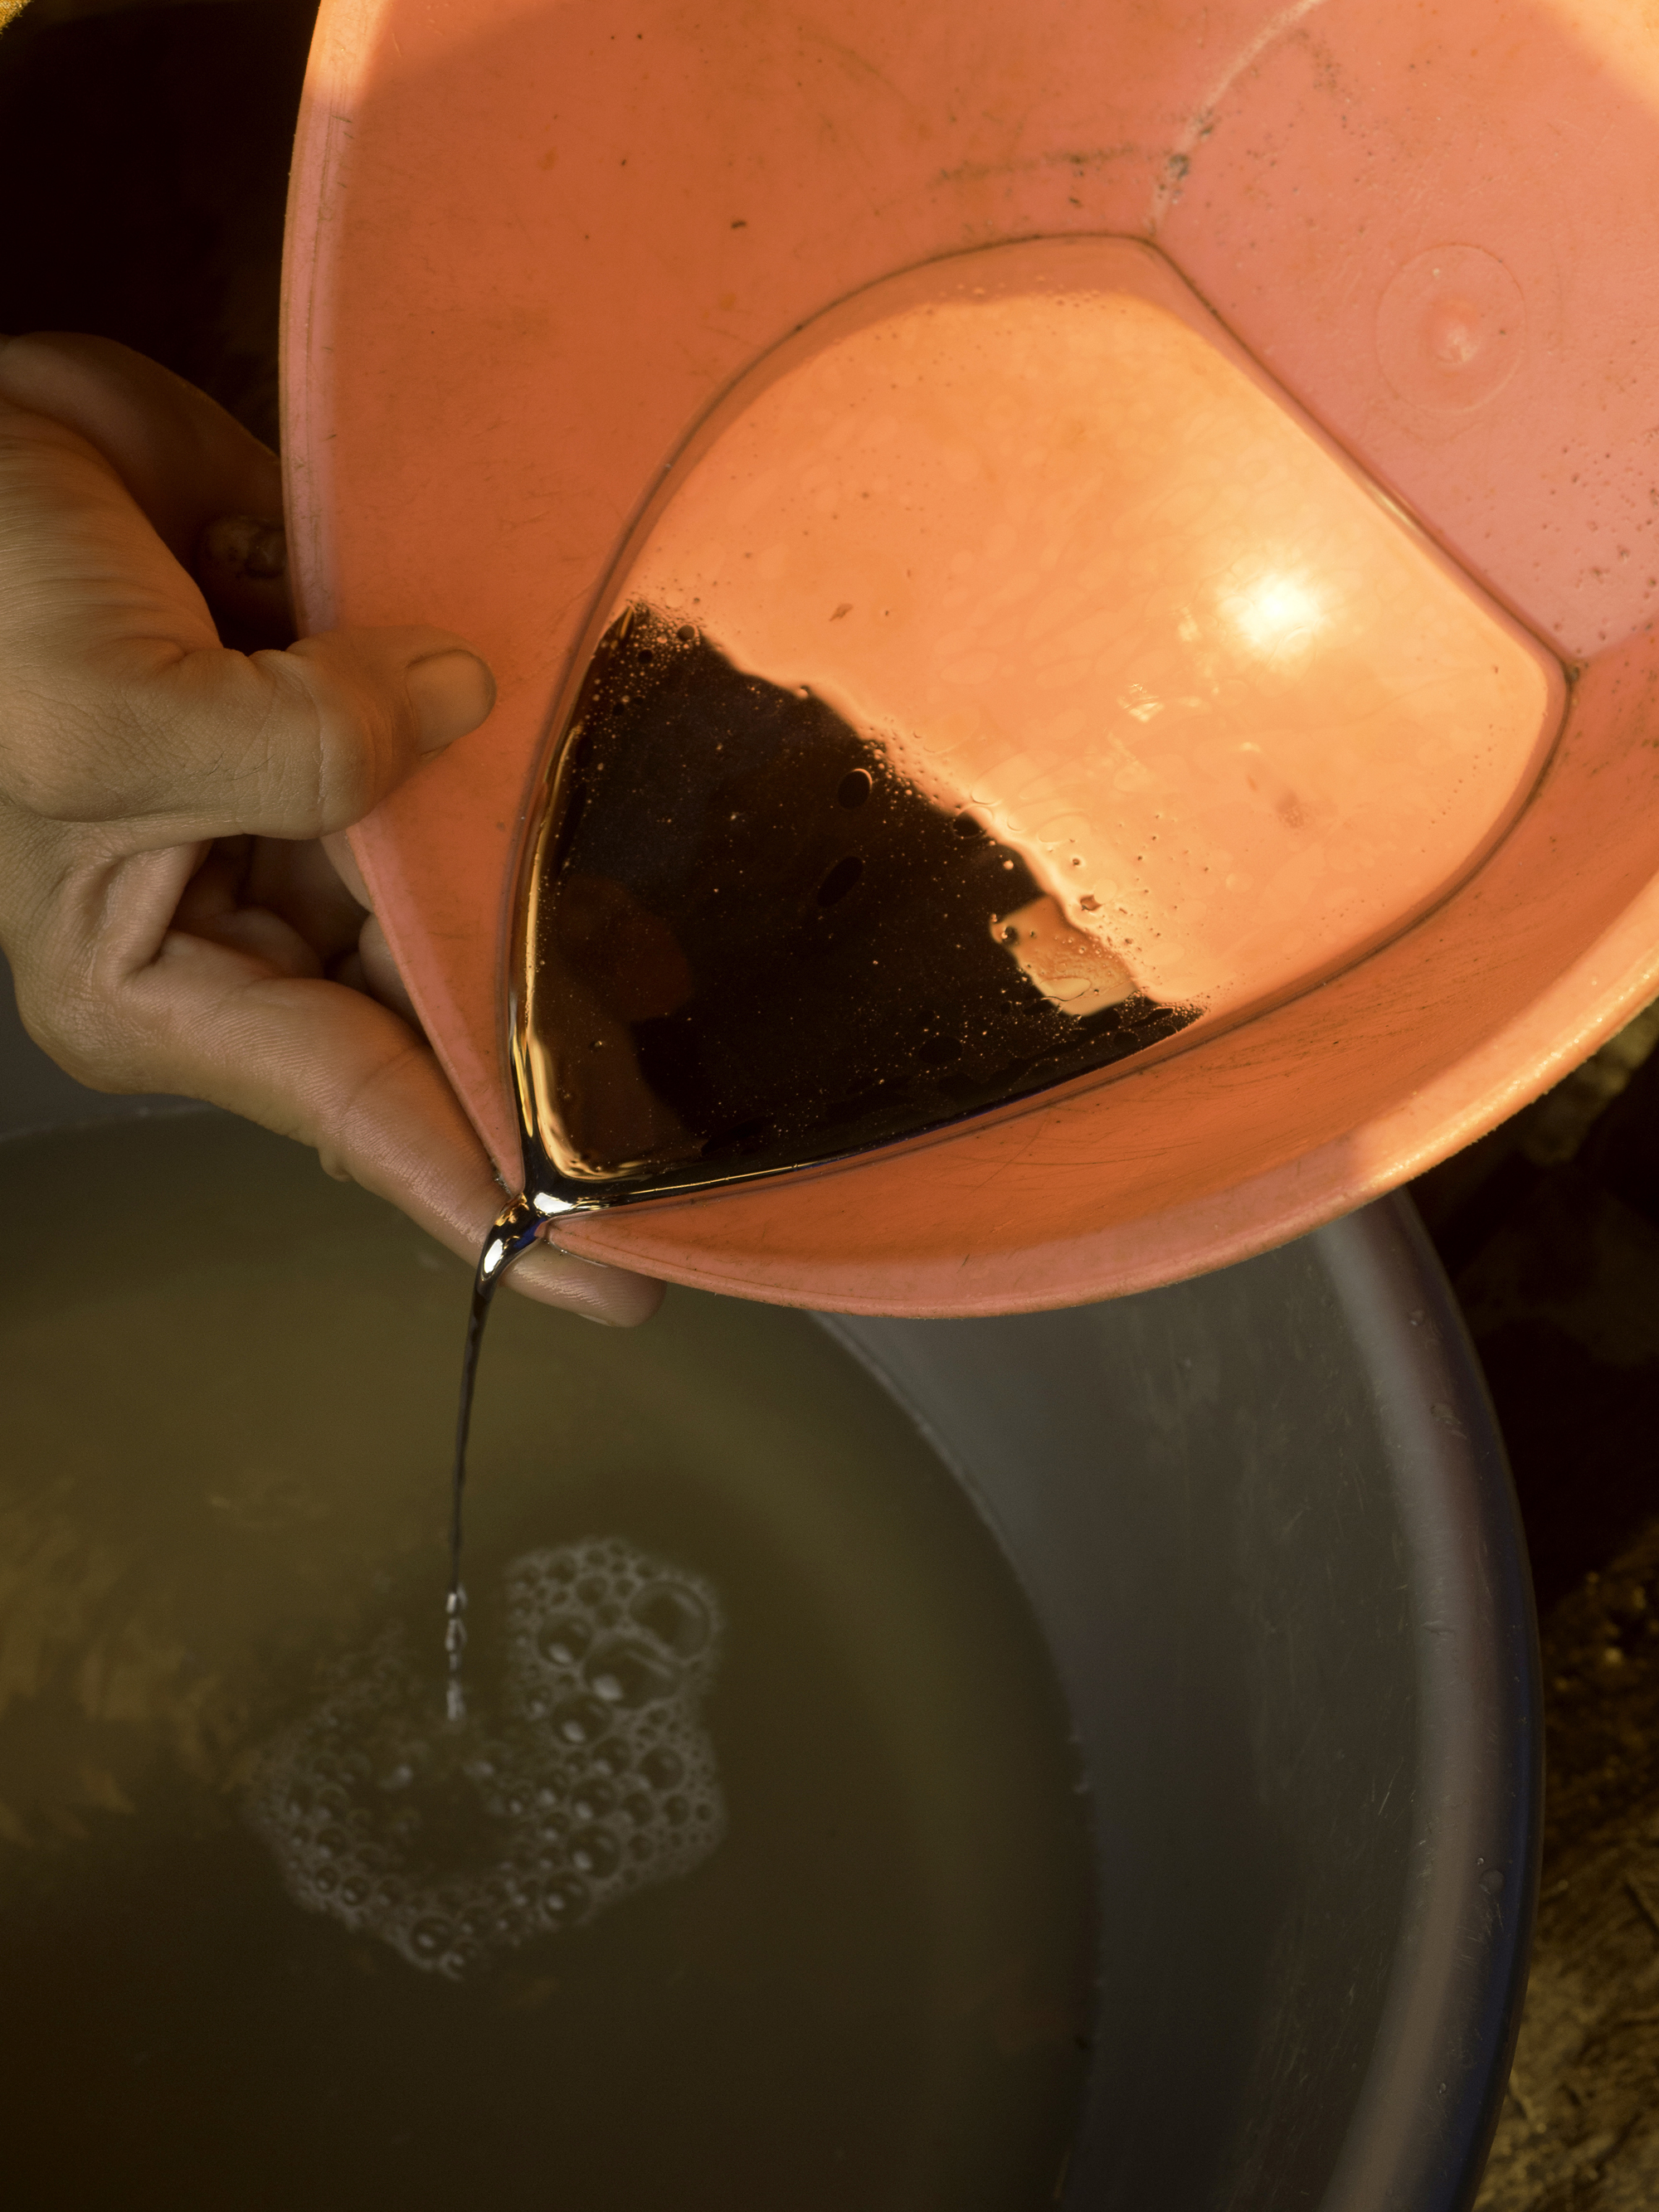 A miner pours a pan of mercury into a smaller container at a gold processing facility. Image by Larry Price. Indonesia, 2015.